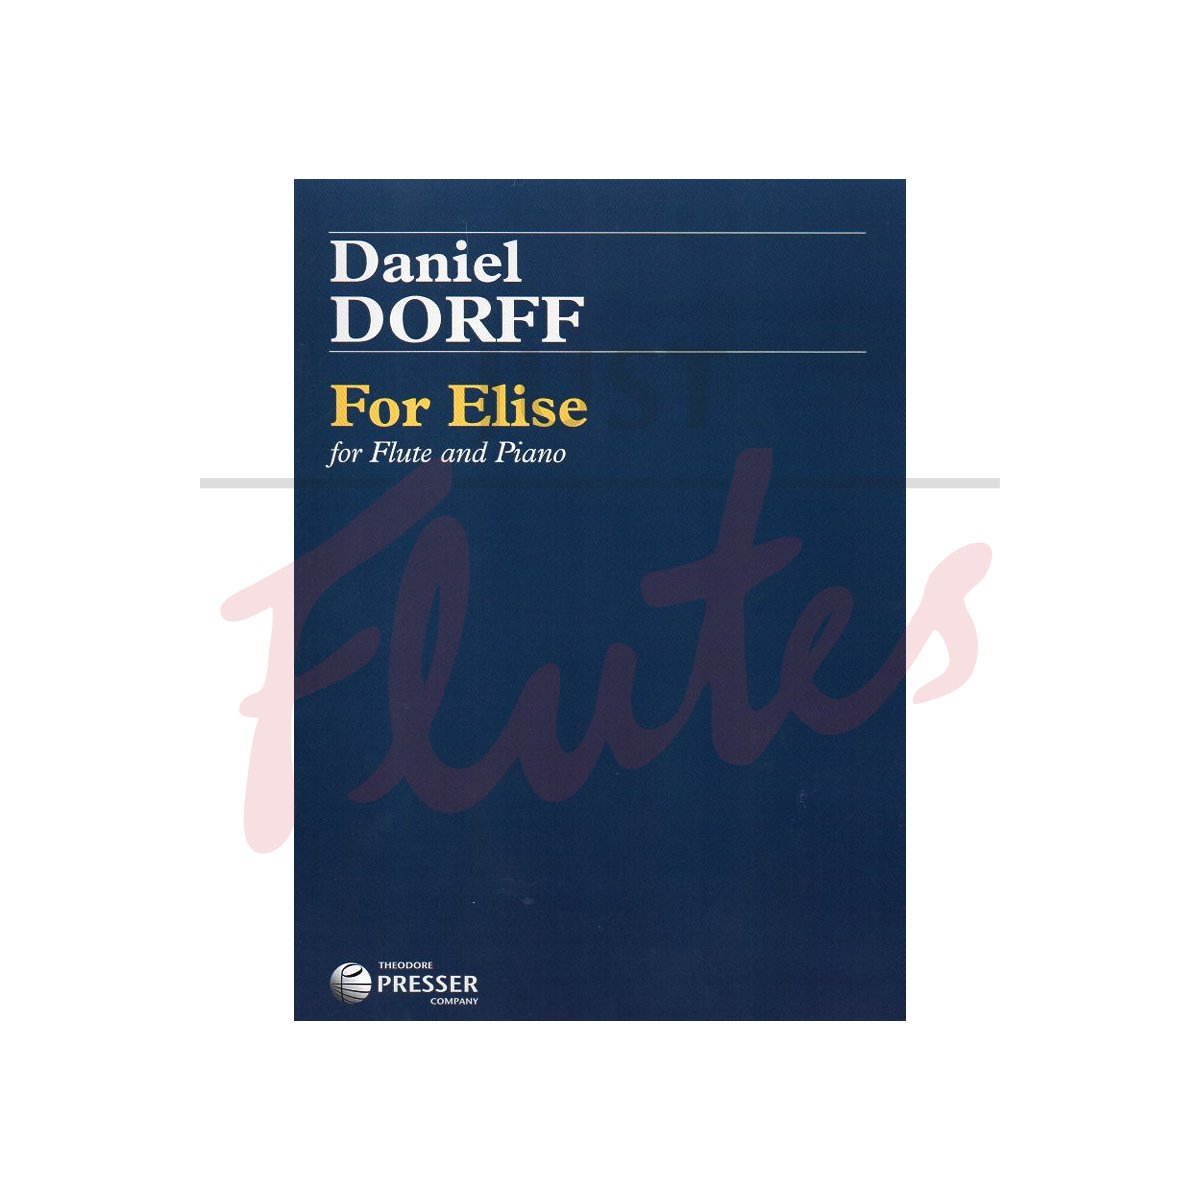 For Elise for Flute and Piano